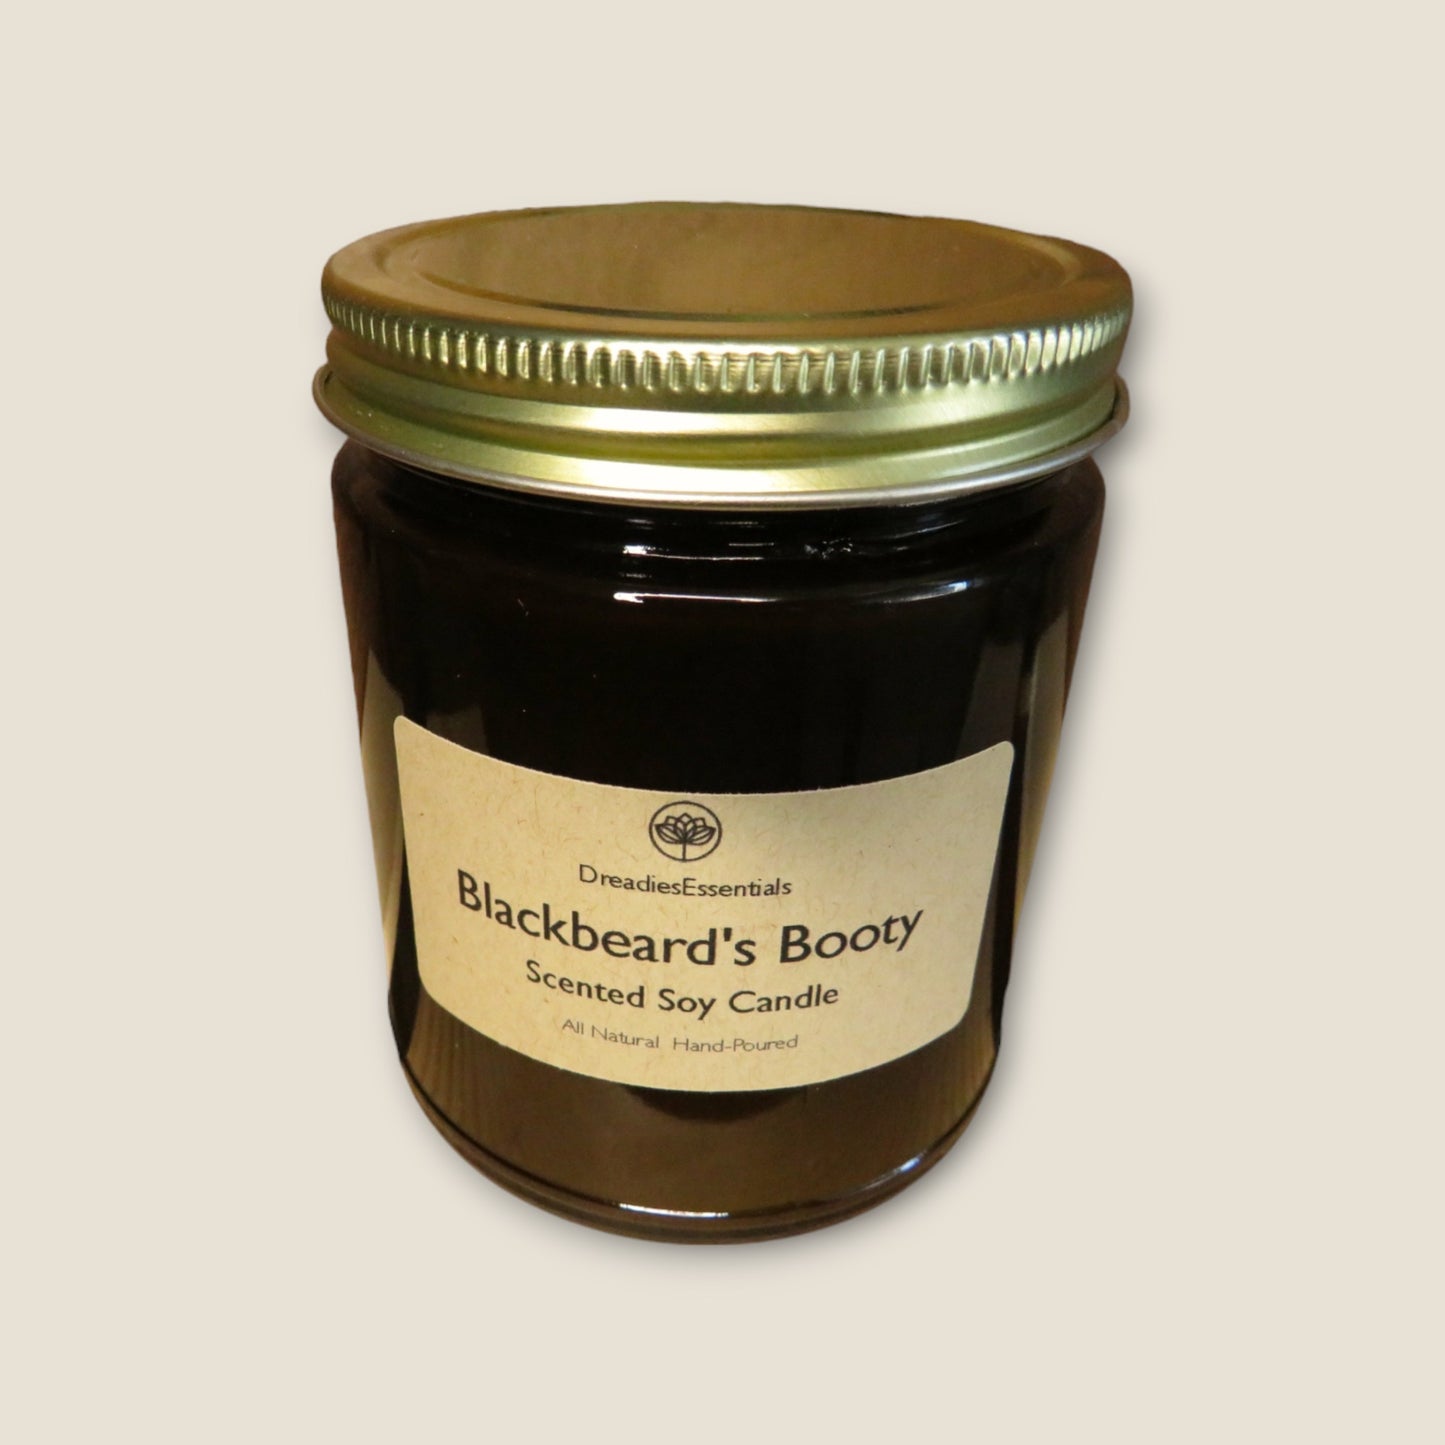 Blackbeard's Booty Scented Soy Candle